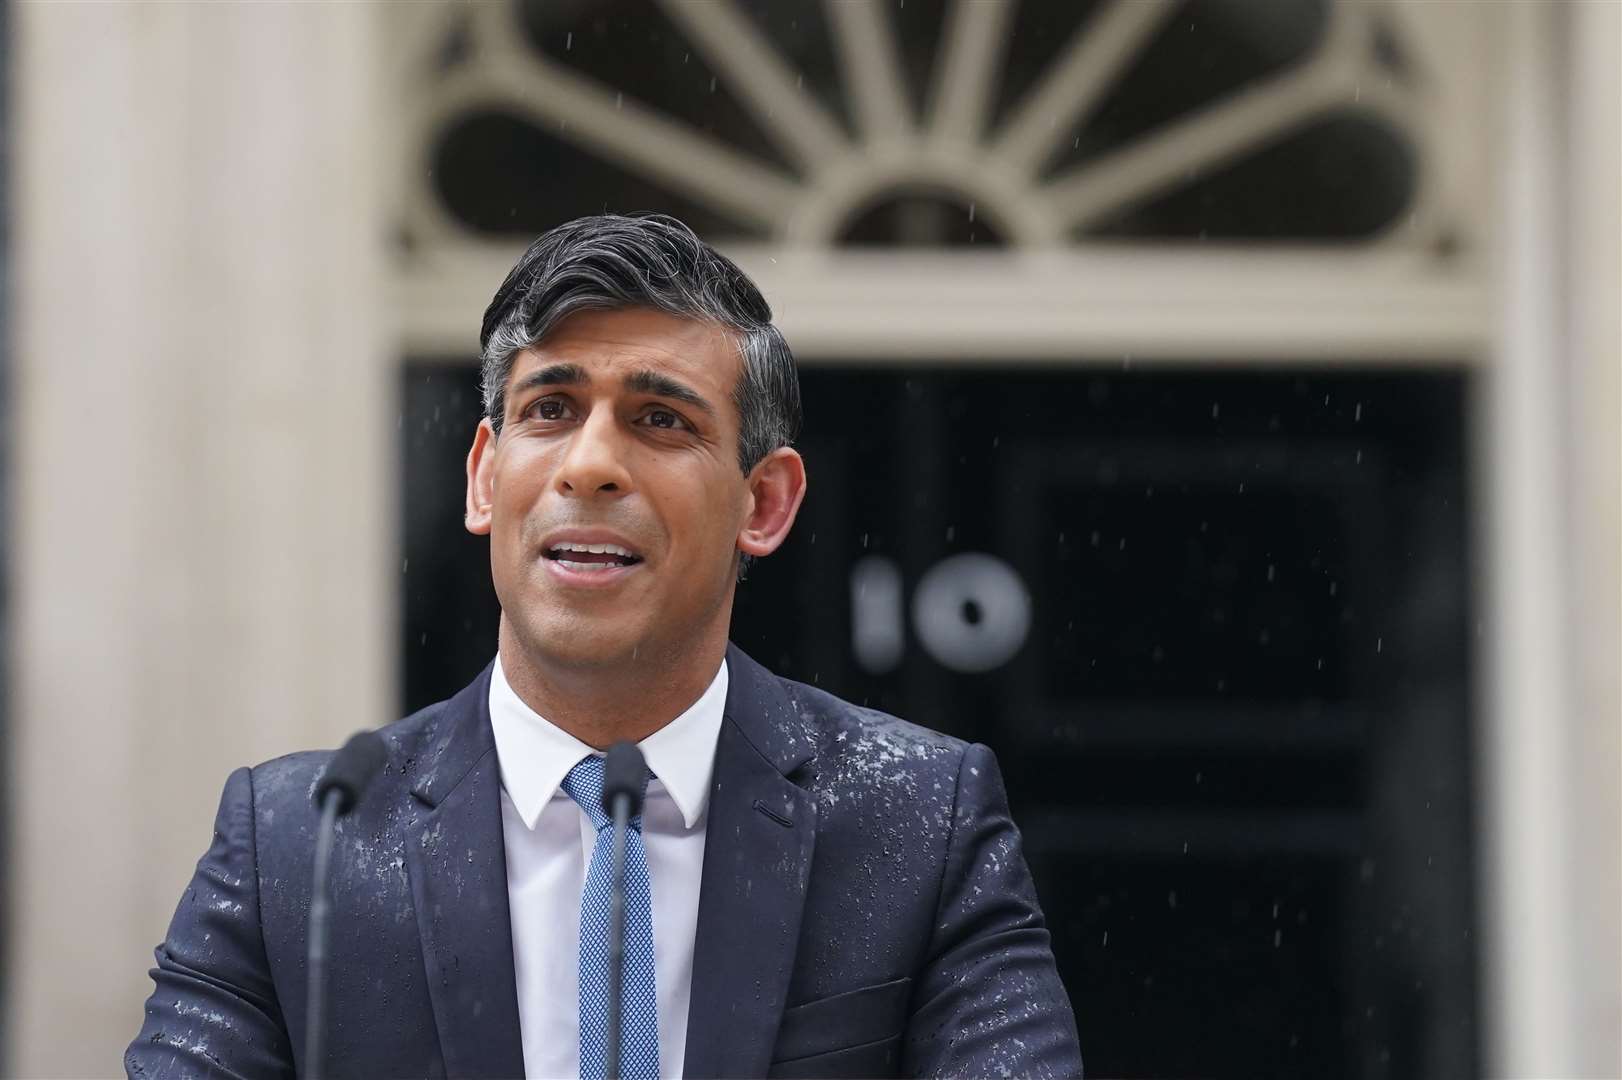 Sir Keir Starmer said it was ‘farcical’ for Rishi Sunak to claim to be the only person with a plan after ‘standing in the rain without an umbrella’ (Stefan Rousseau/PA)